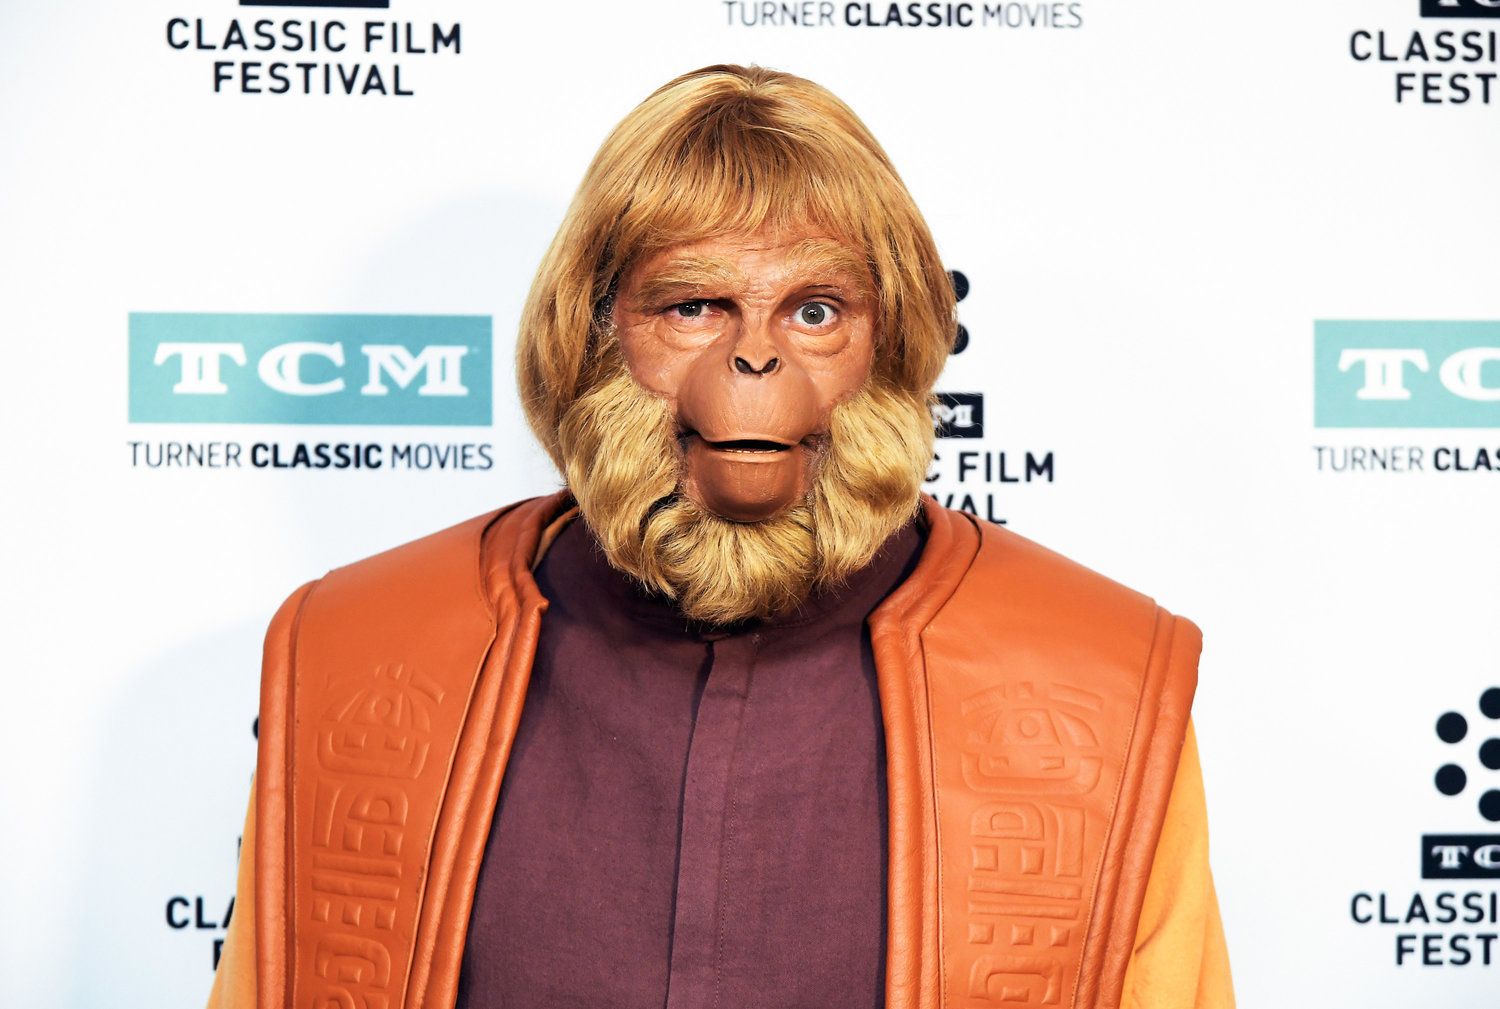 LOS ANGELES, CA - APRIL 08: Dana Gould as Dr. Zaius attends the screening of 'Planet of The Apes' during the 2017 TCM Classic Film Festival on April 8, 2017 in Los Angeles, California. 26657_003 (Photo by Charley Gallay/Getty Images for TCM)